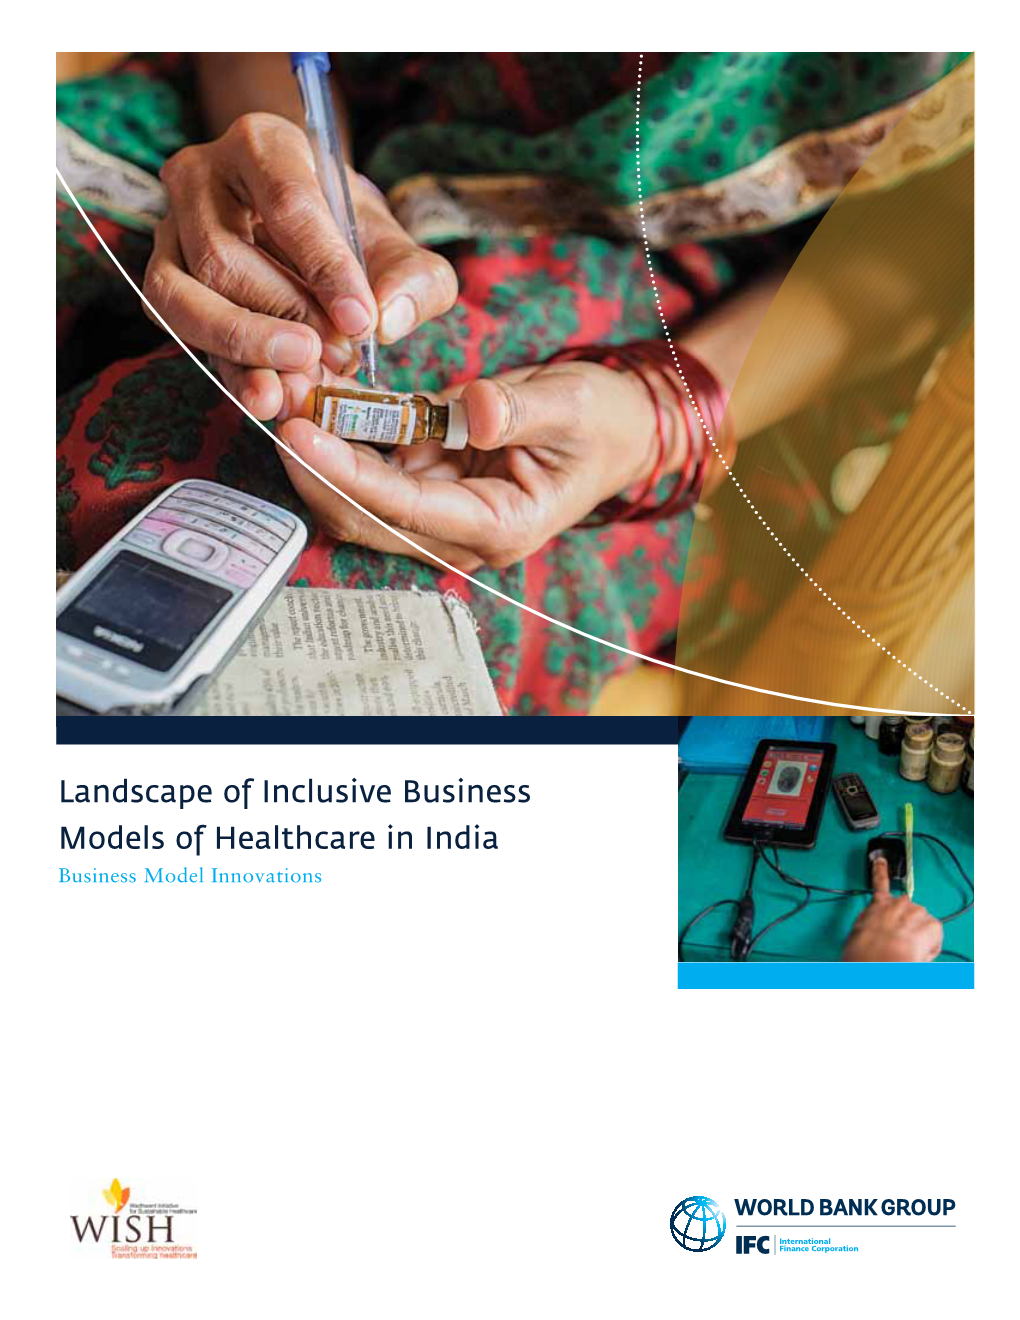 Landscape of Inclusive Business Models of Healthcare in India